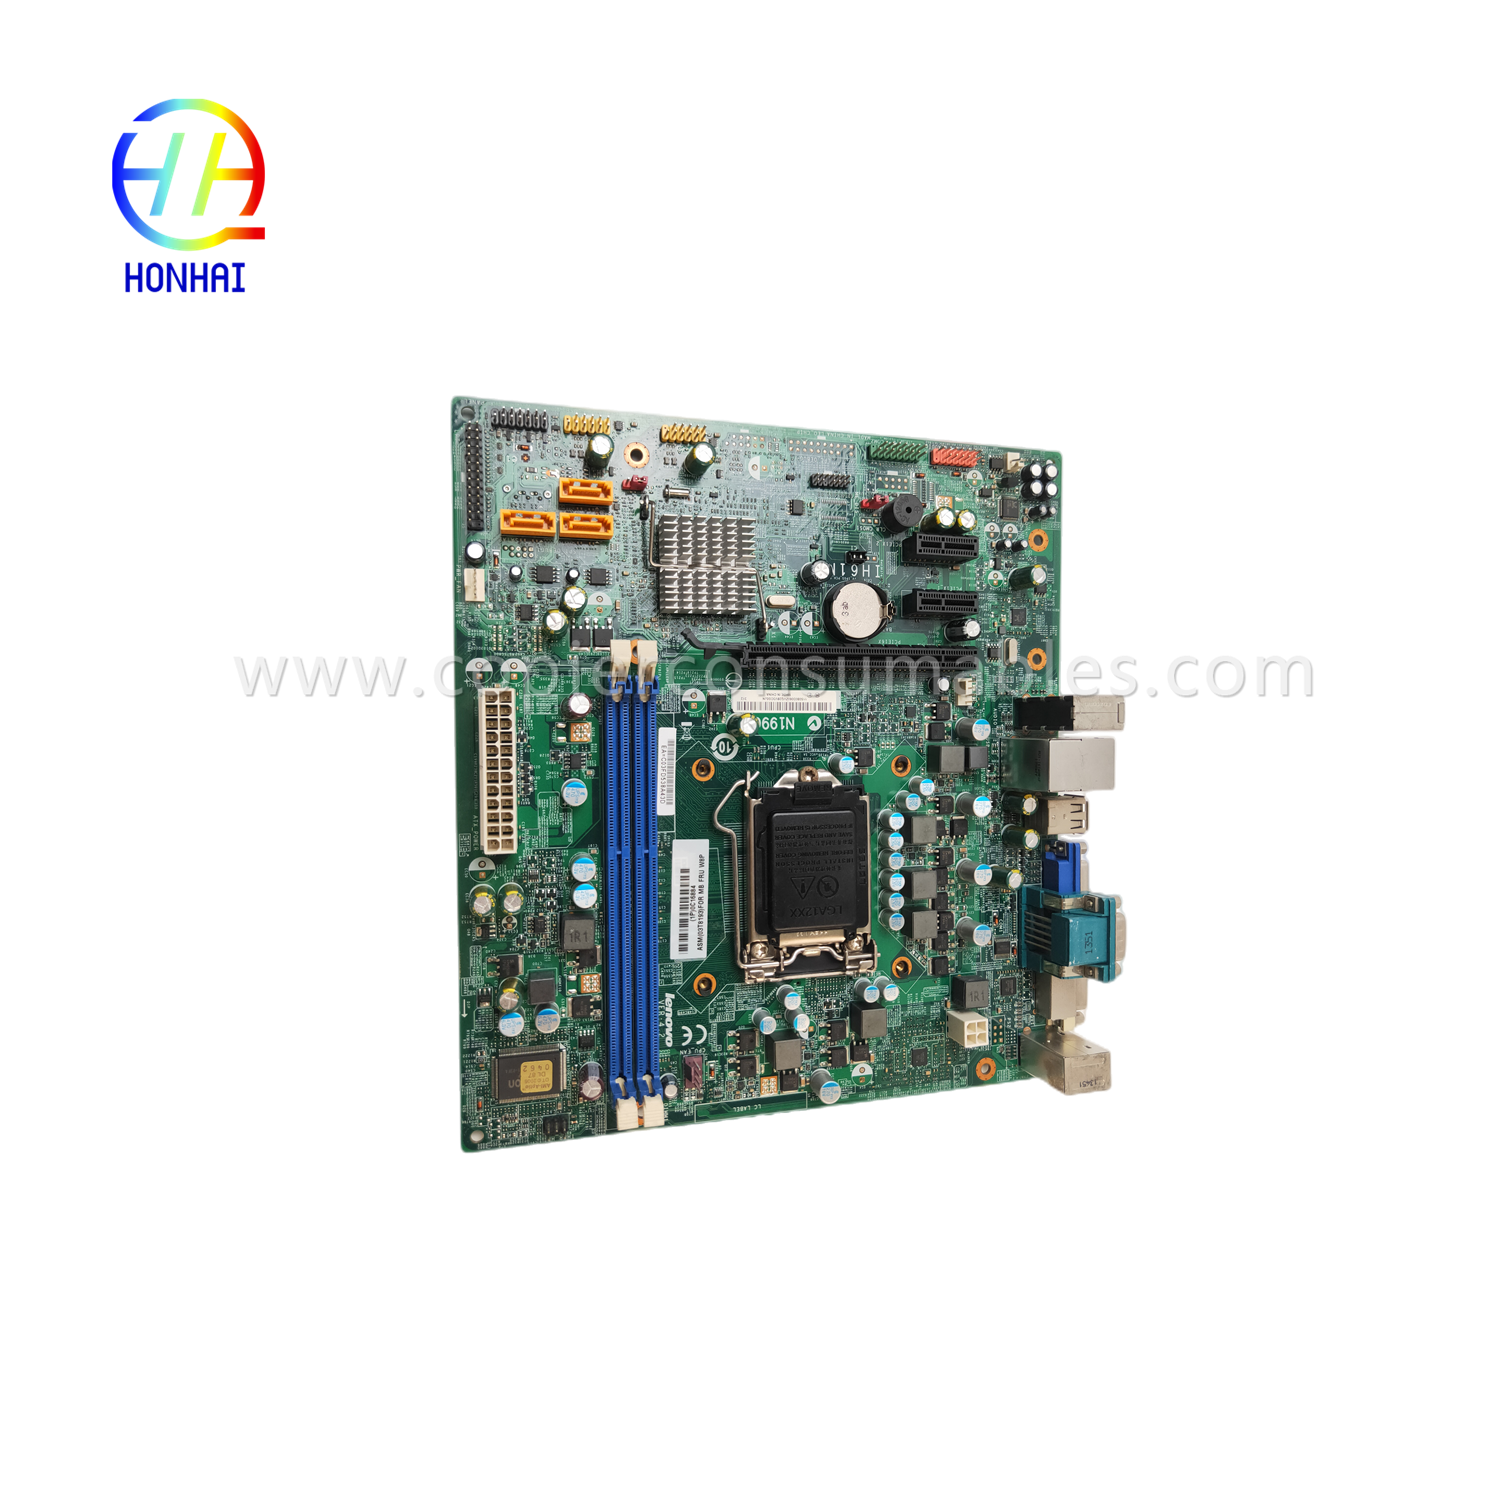 https://www.copierconsumables.com/motherboard-for-lenovo-thinkcentre-m72e-lga-1155-03t8193-system-board-product/